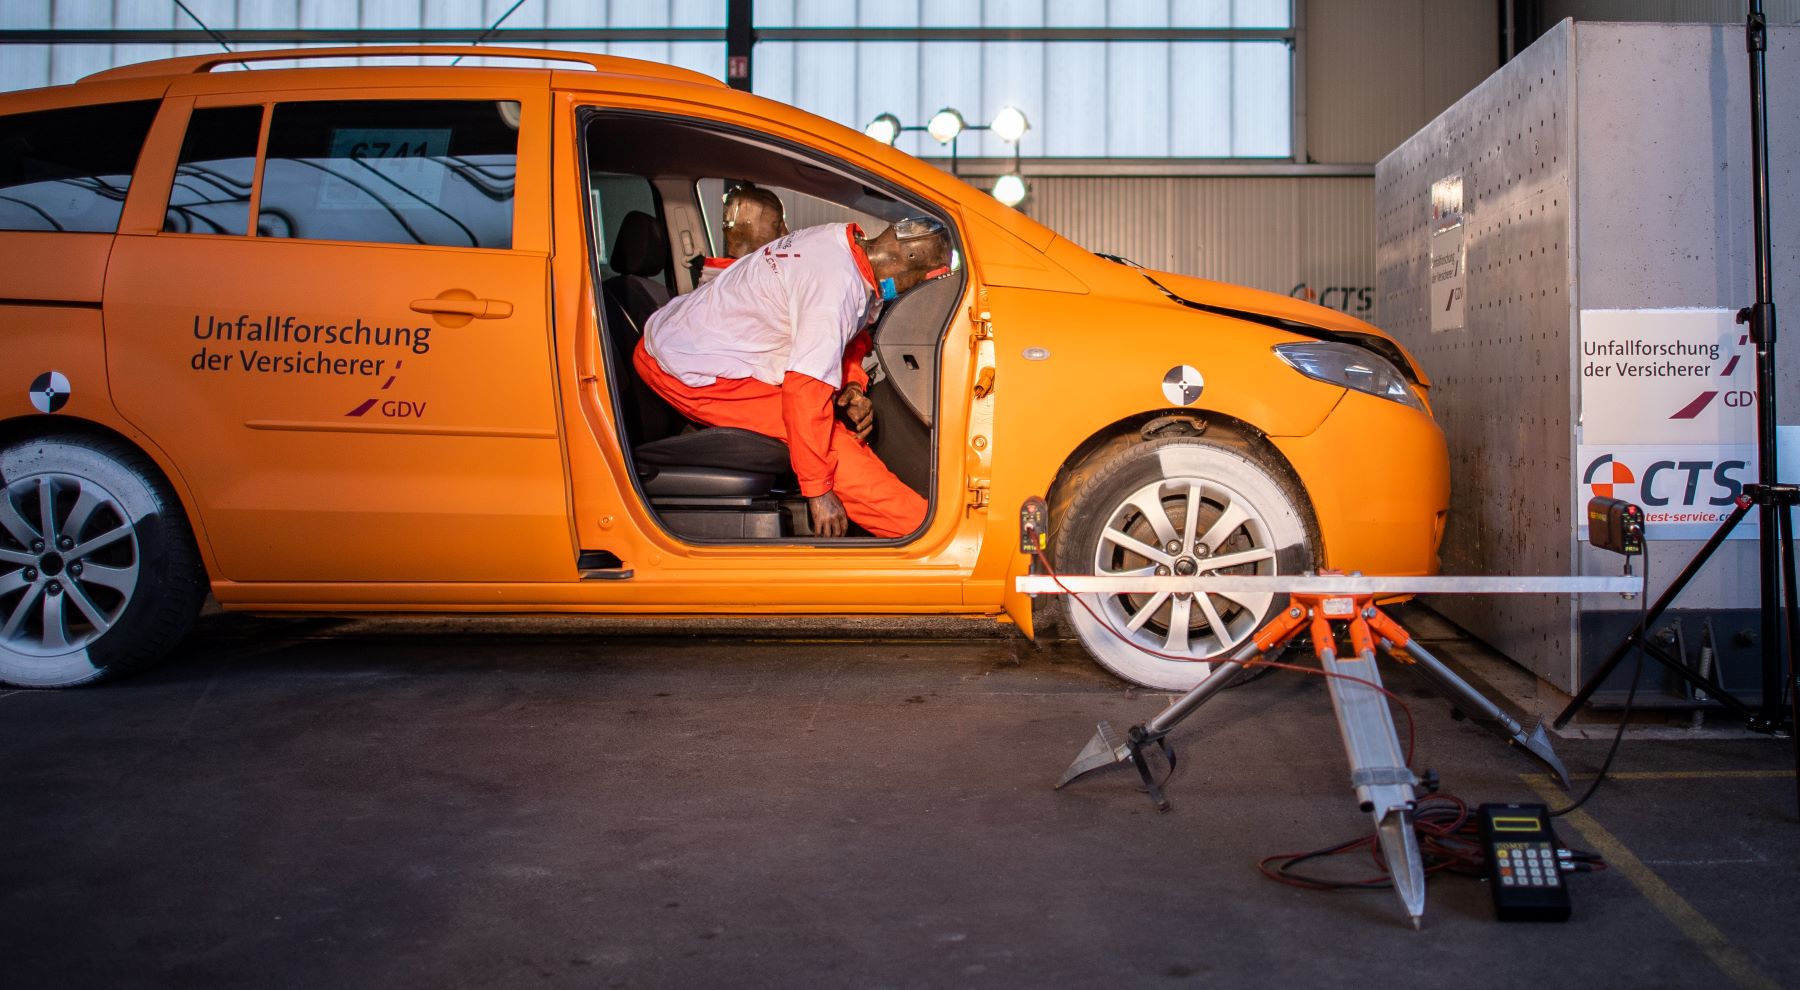 A simulated car crash safety test with a dummy in Muenster, Germany